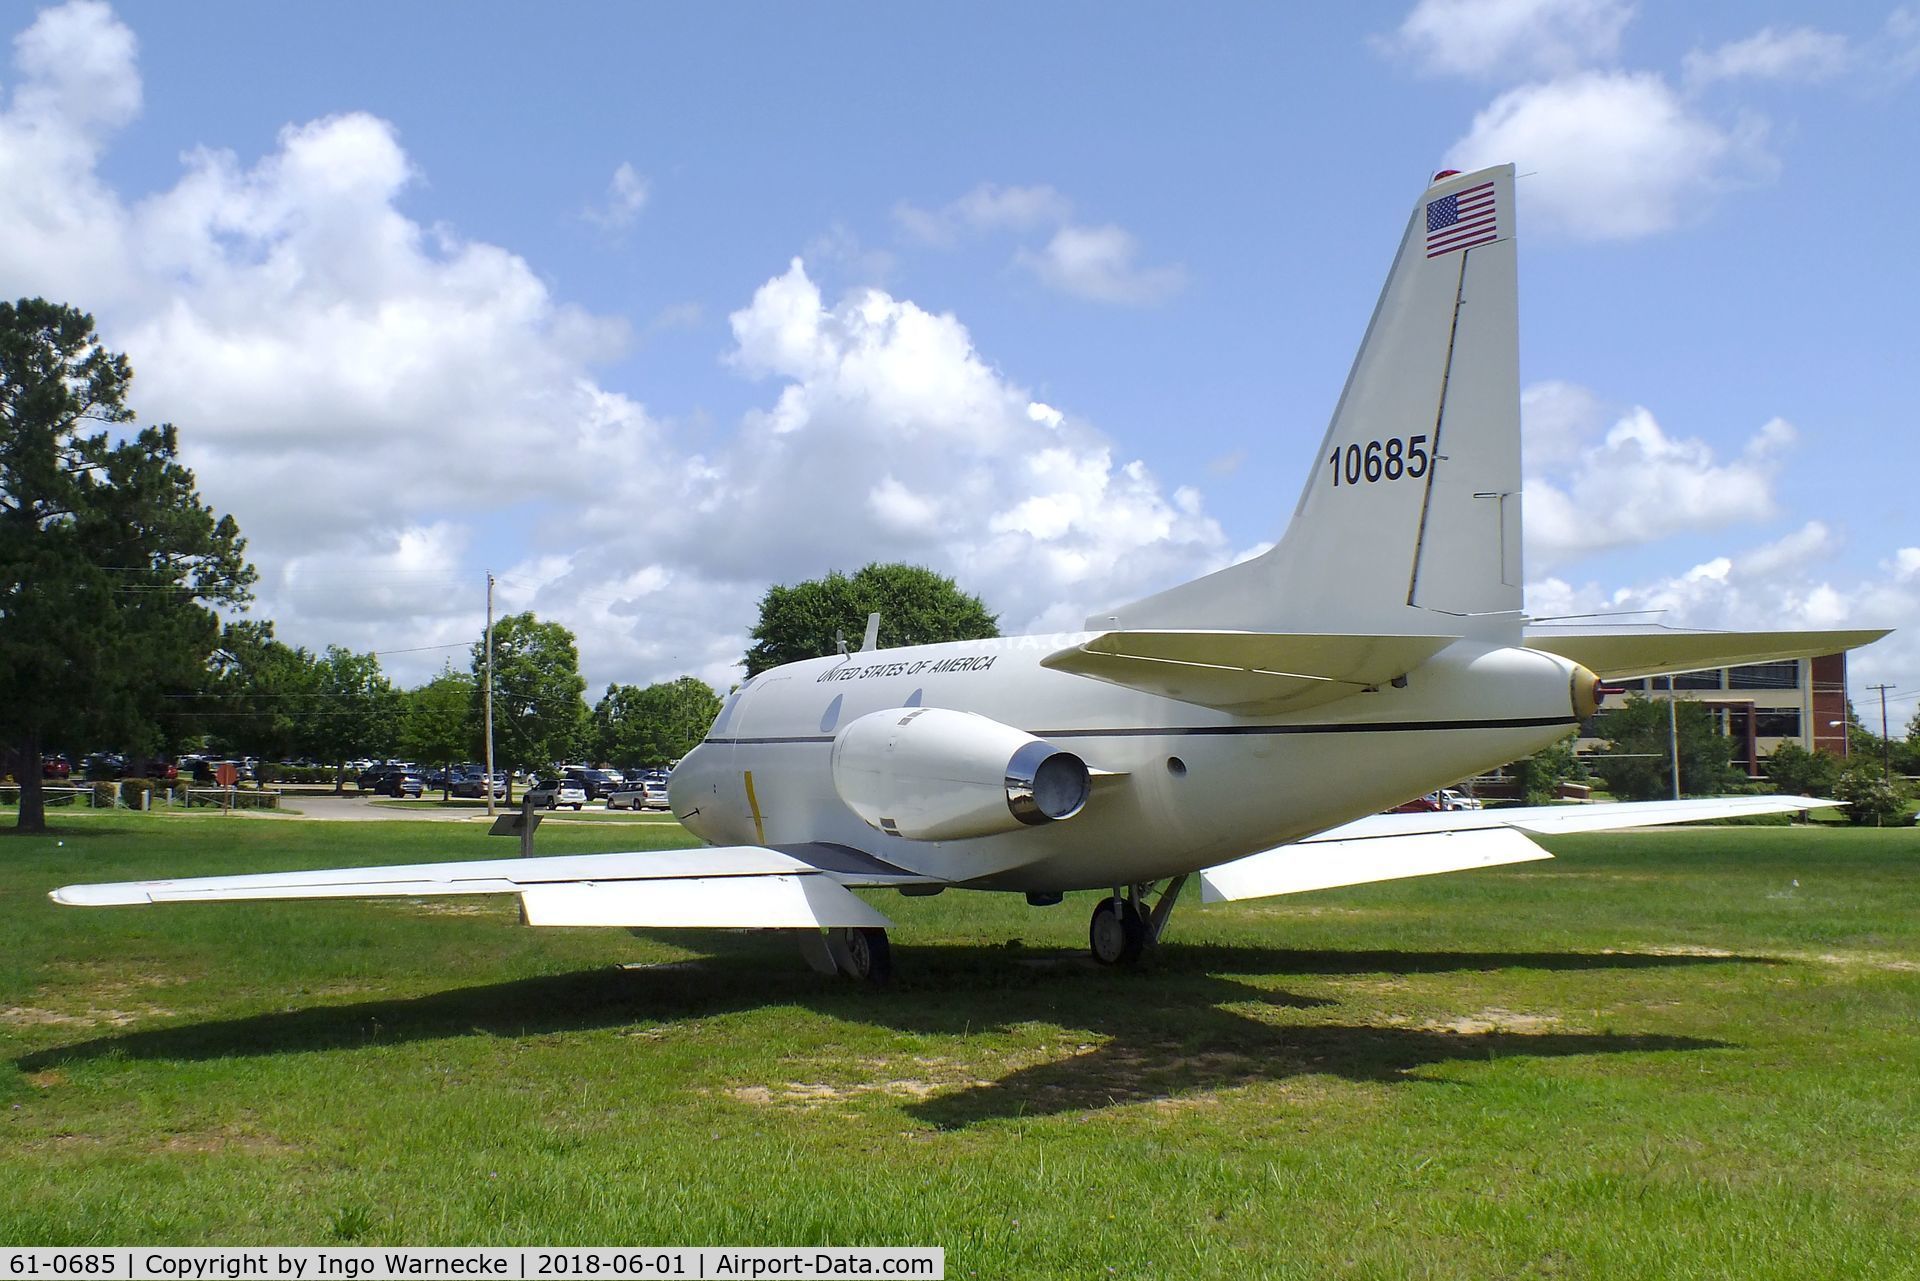 61-0685, 1961 North American CT-39A Sabreliner C/N 265-88, North America  CT-39A Sabreliner VIP-Transport at the US Army Aviation Museum, Ft. Rucker AL